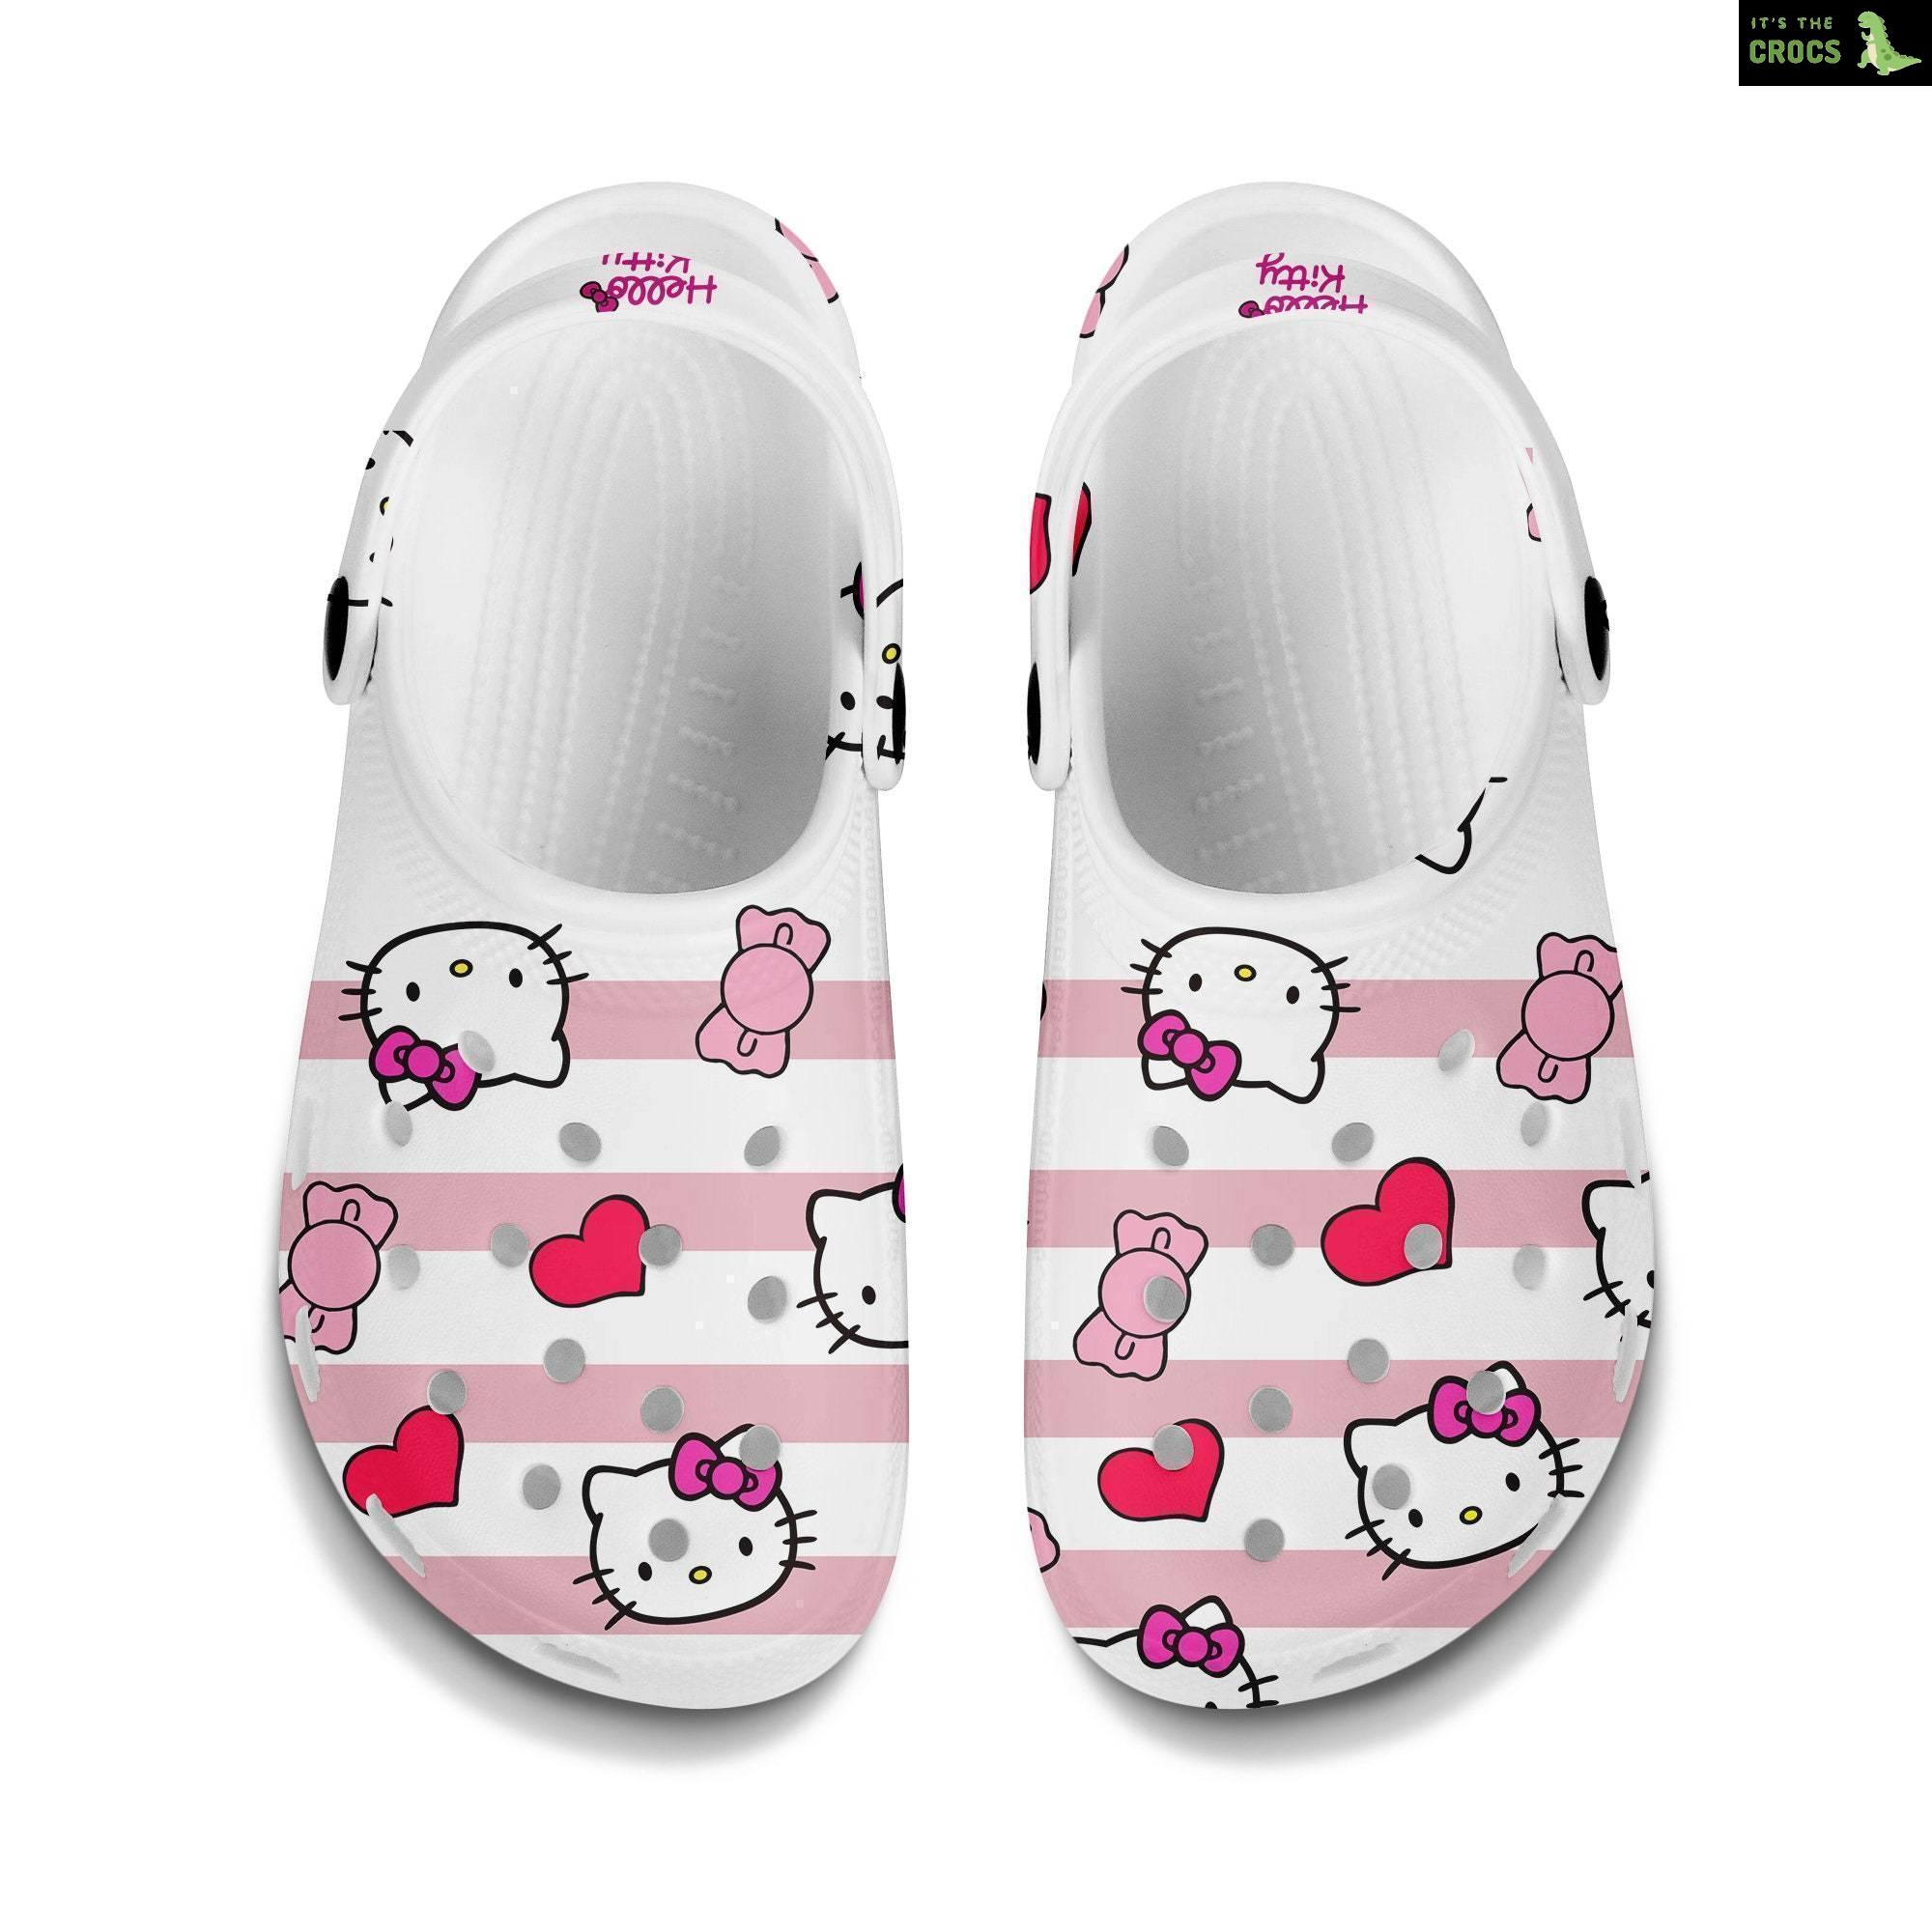 Personalized Kitty Cat Cartoon Clogs, Crocs Crocband Clogs Comfy Footwear Shoes